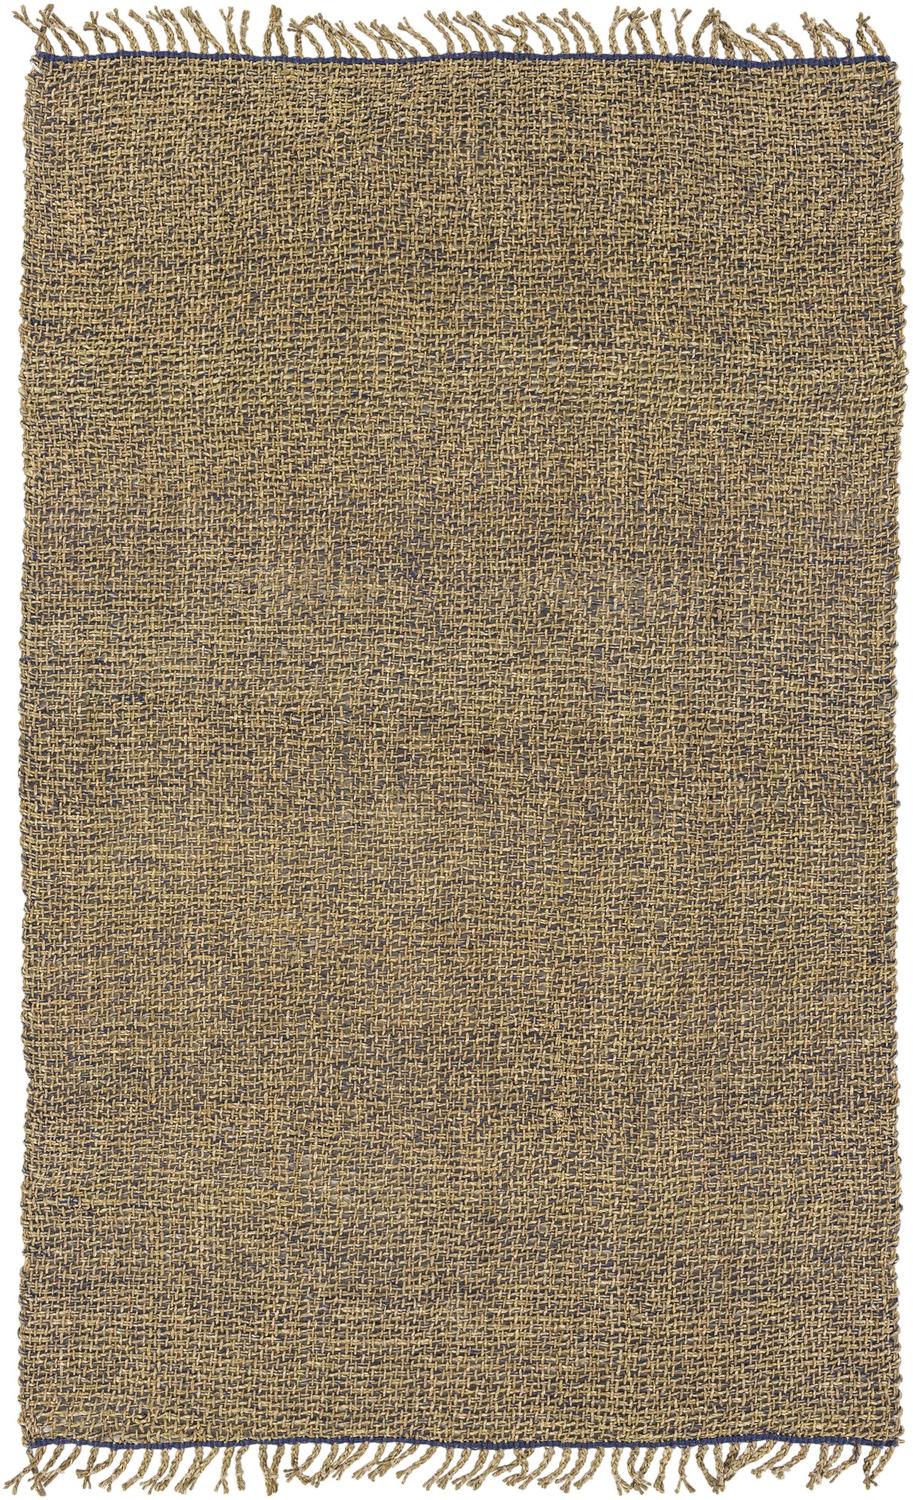 Diva At Home 5' x 7.5' Sundried Taupe Brown Hand Woven Reversible Area Throw Rug